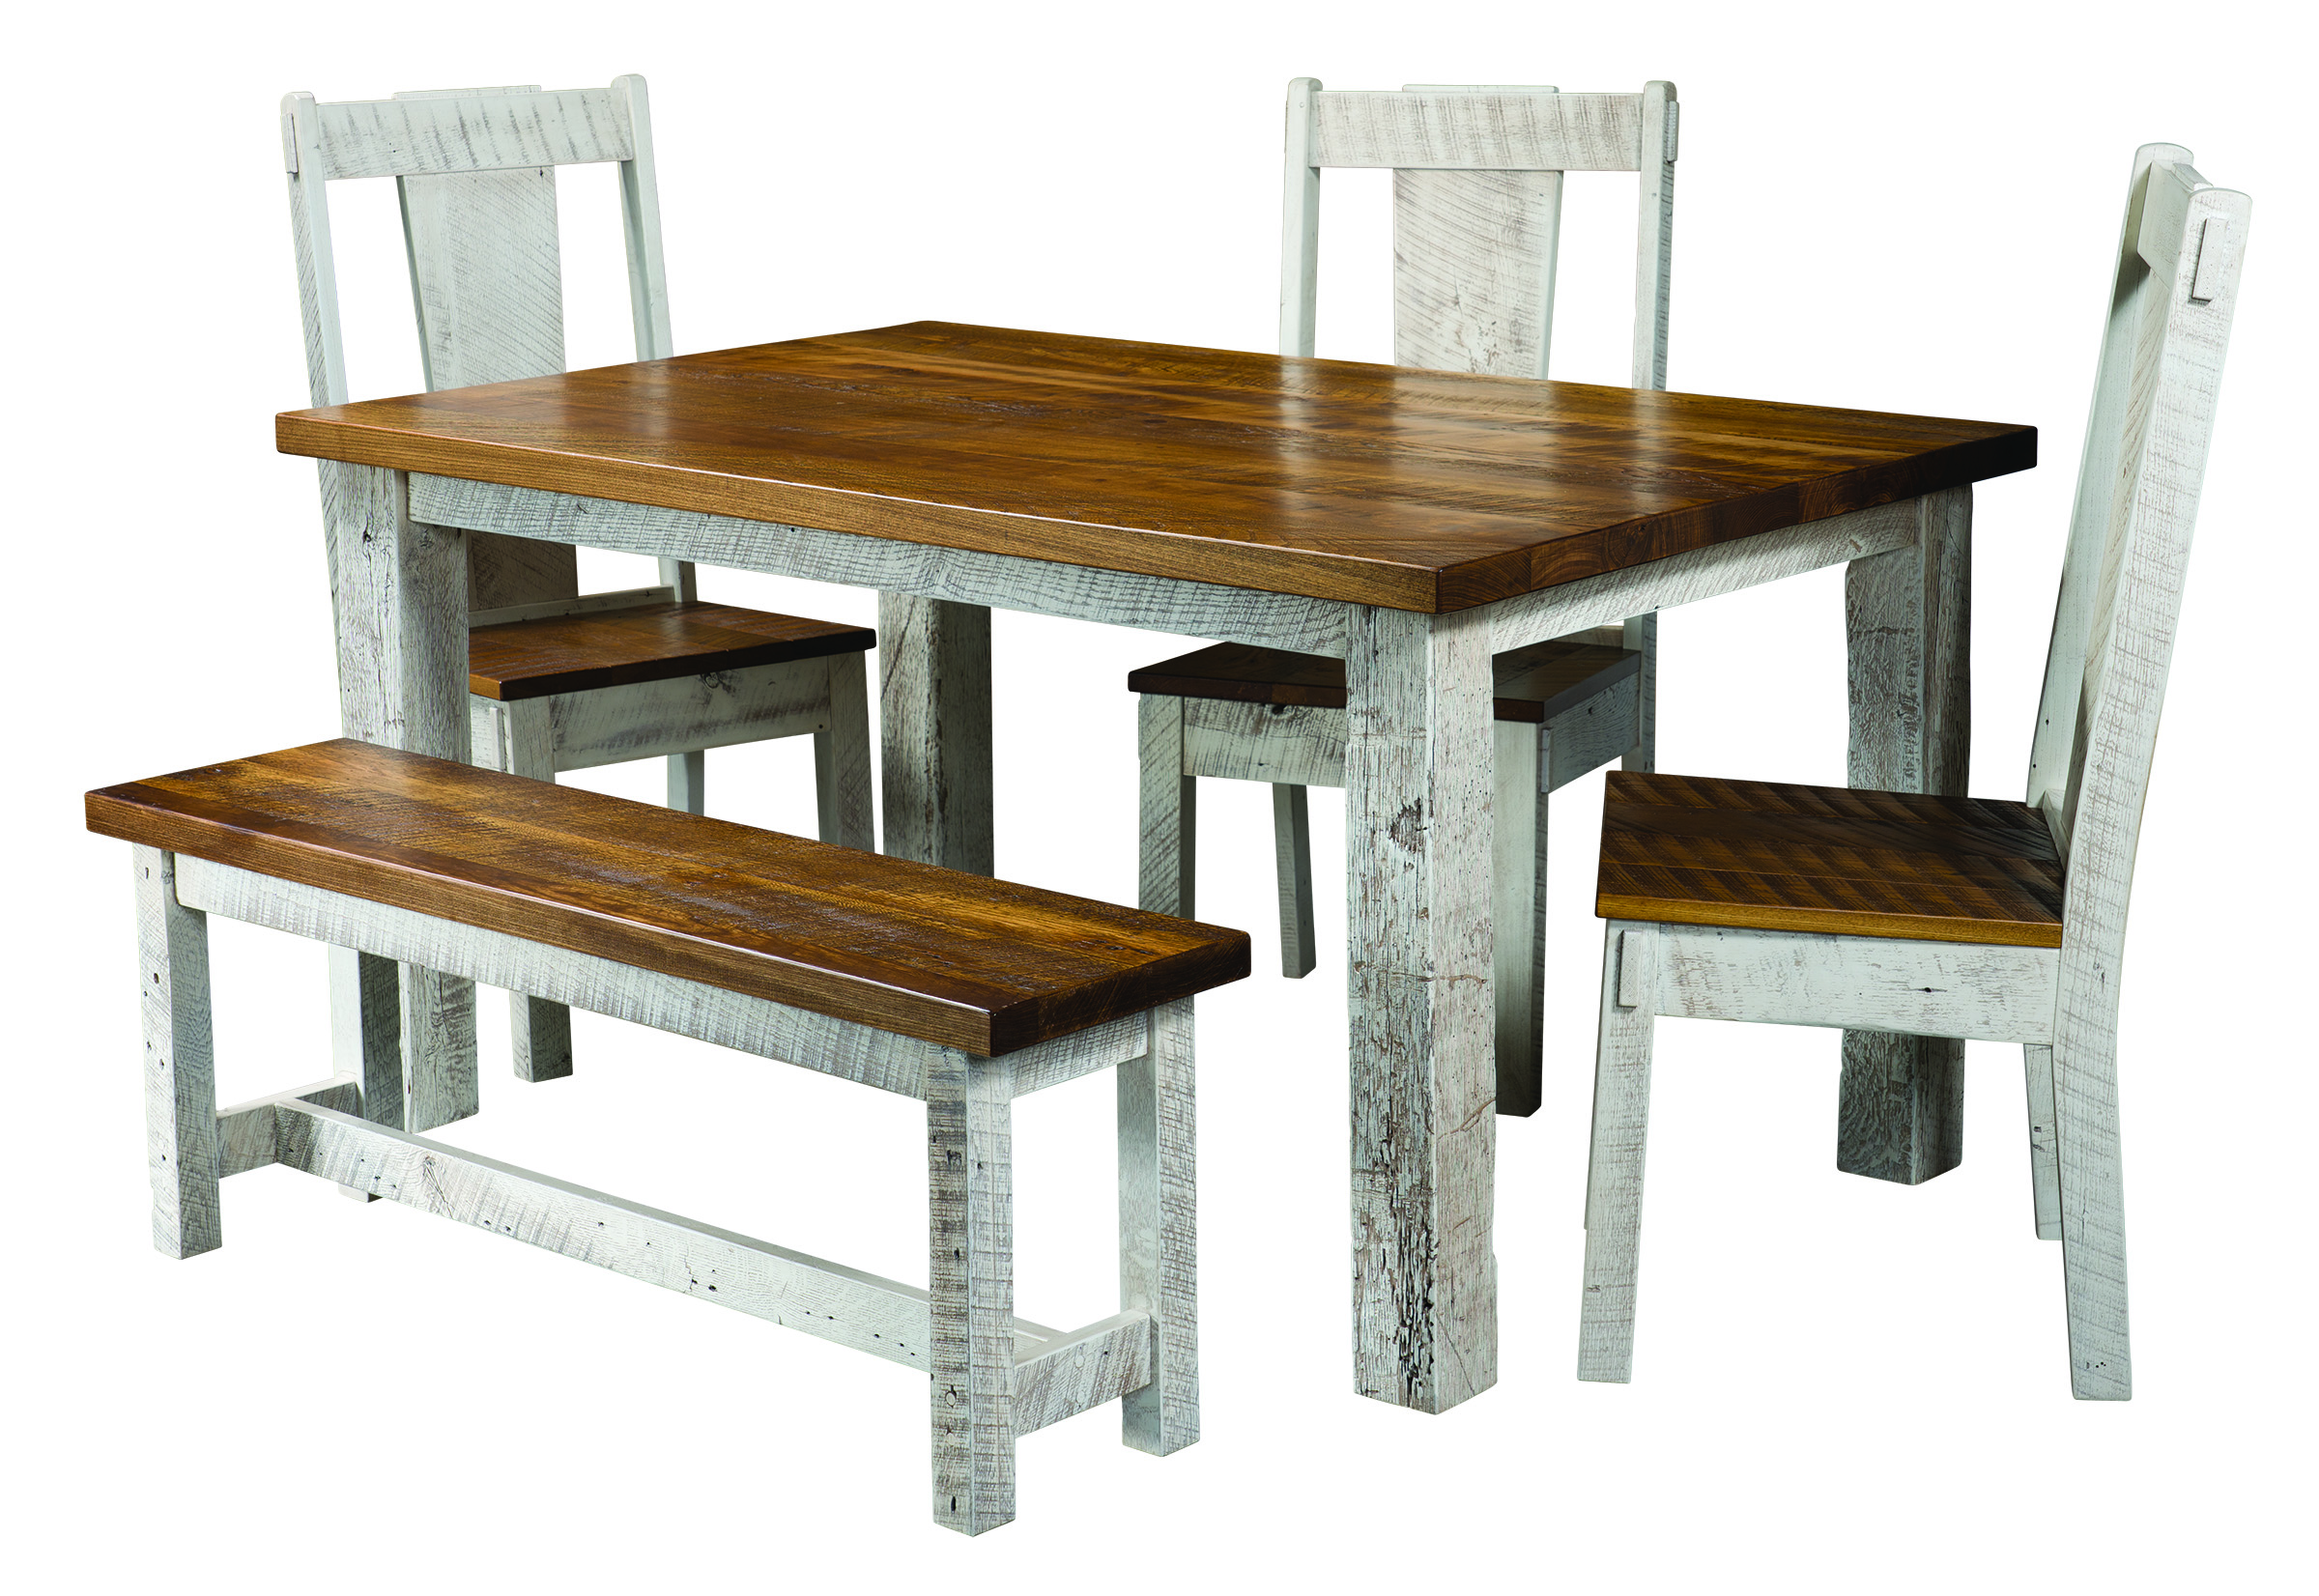 Solid wood furniture made by Cross Timbers Woodwork